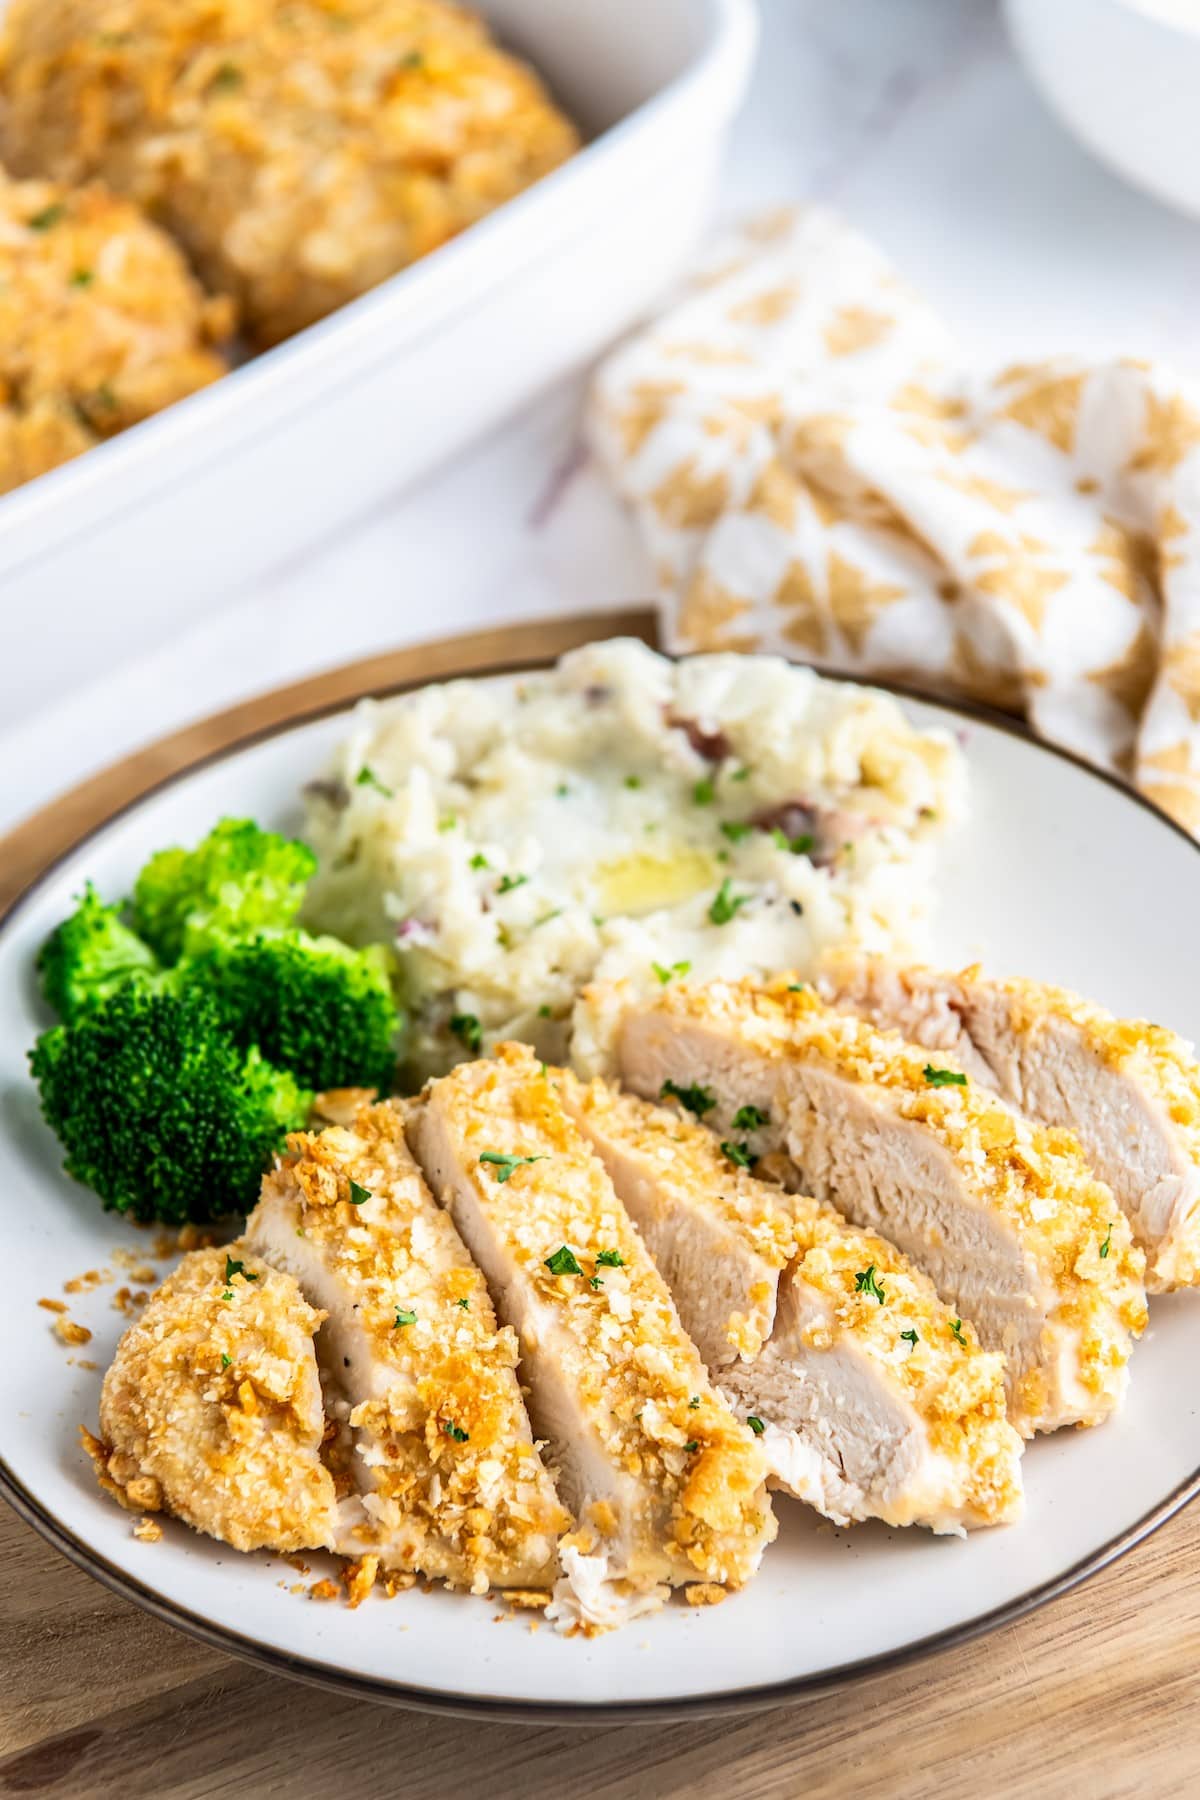 Ritz cracker chicken served with mashed potatoes and broccoli.